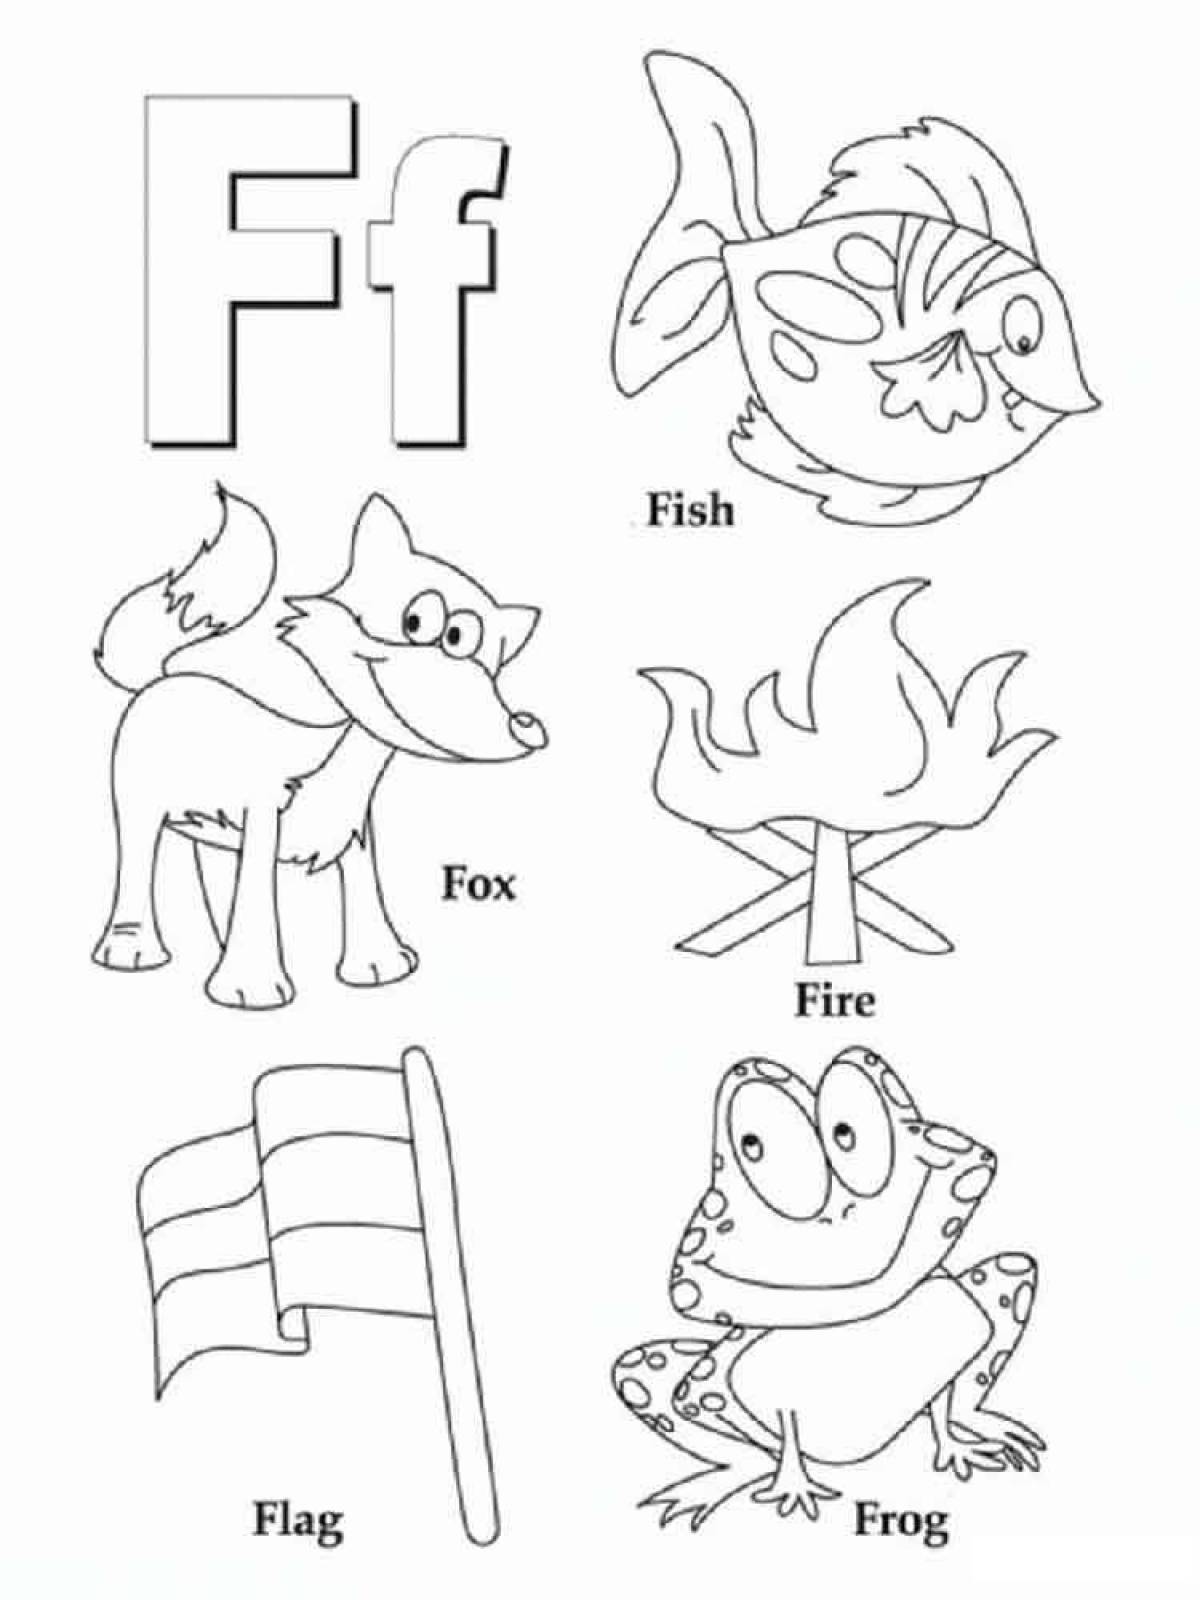 Coloring book with alphabet for 2nd grade children